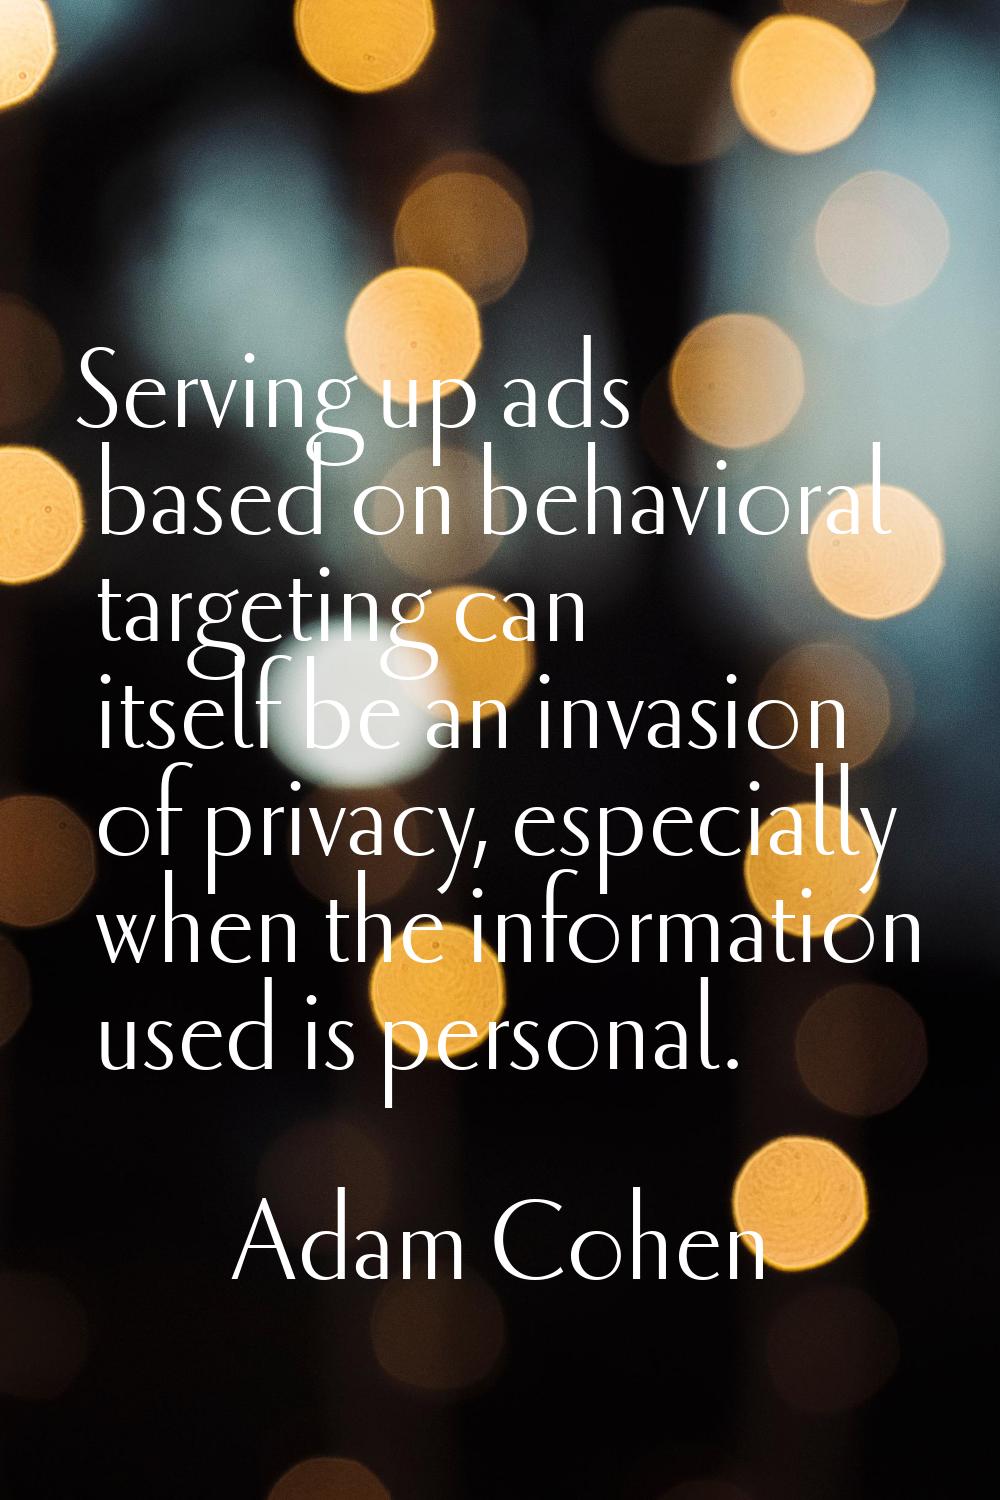 Serving up ads based on behavioral targeting can itself be an invasion of privacy, especially when 